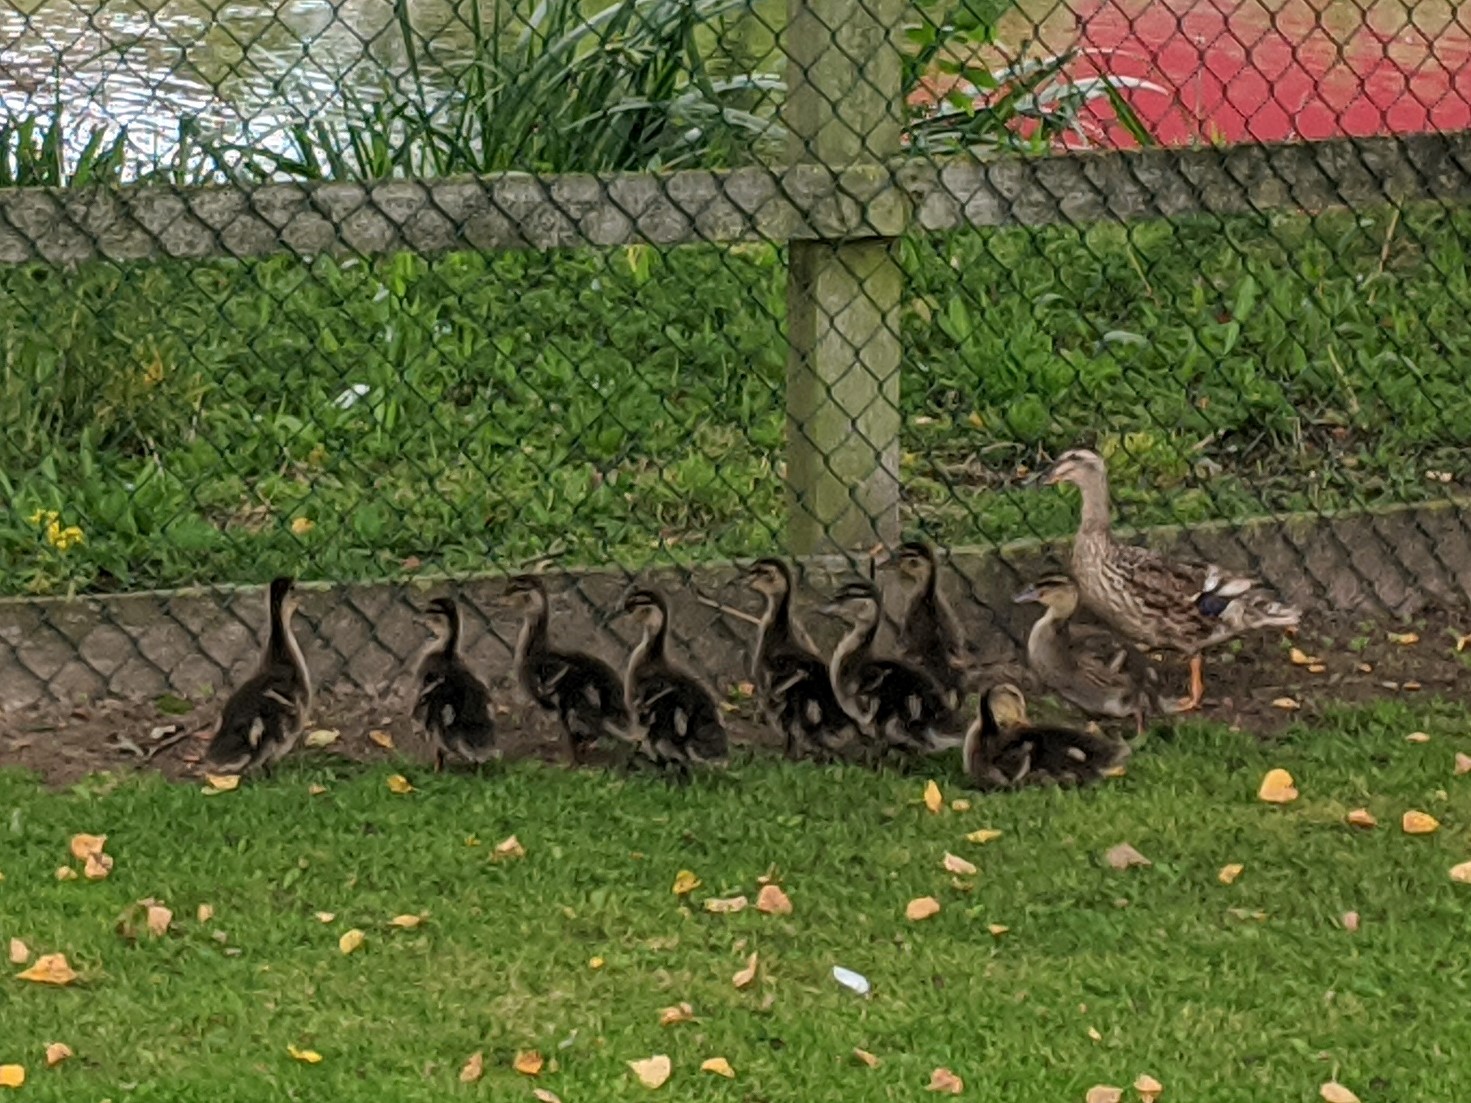 The nine ducklings continue to thrive, September 7th